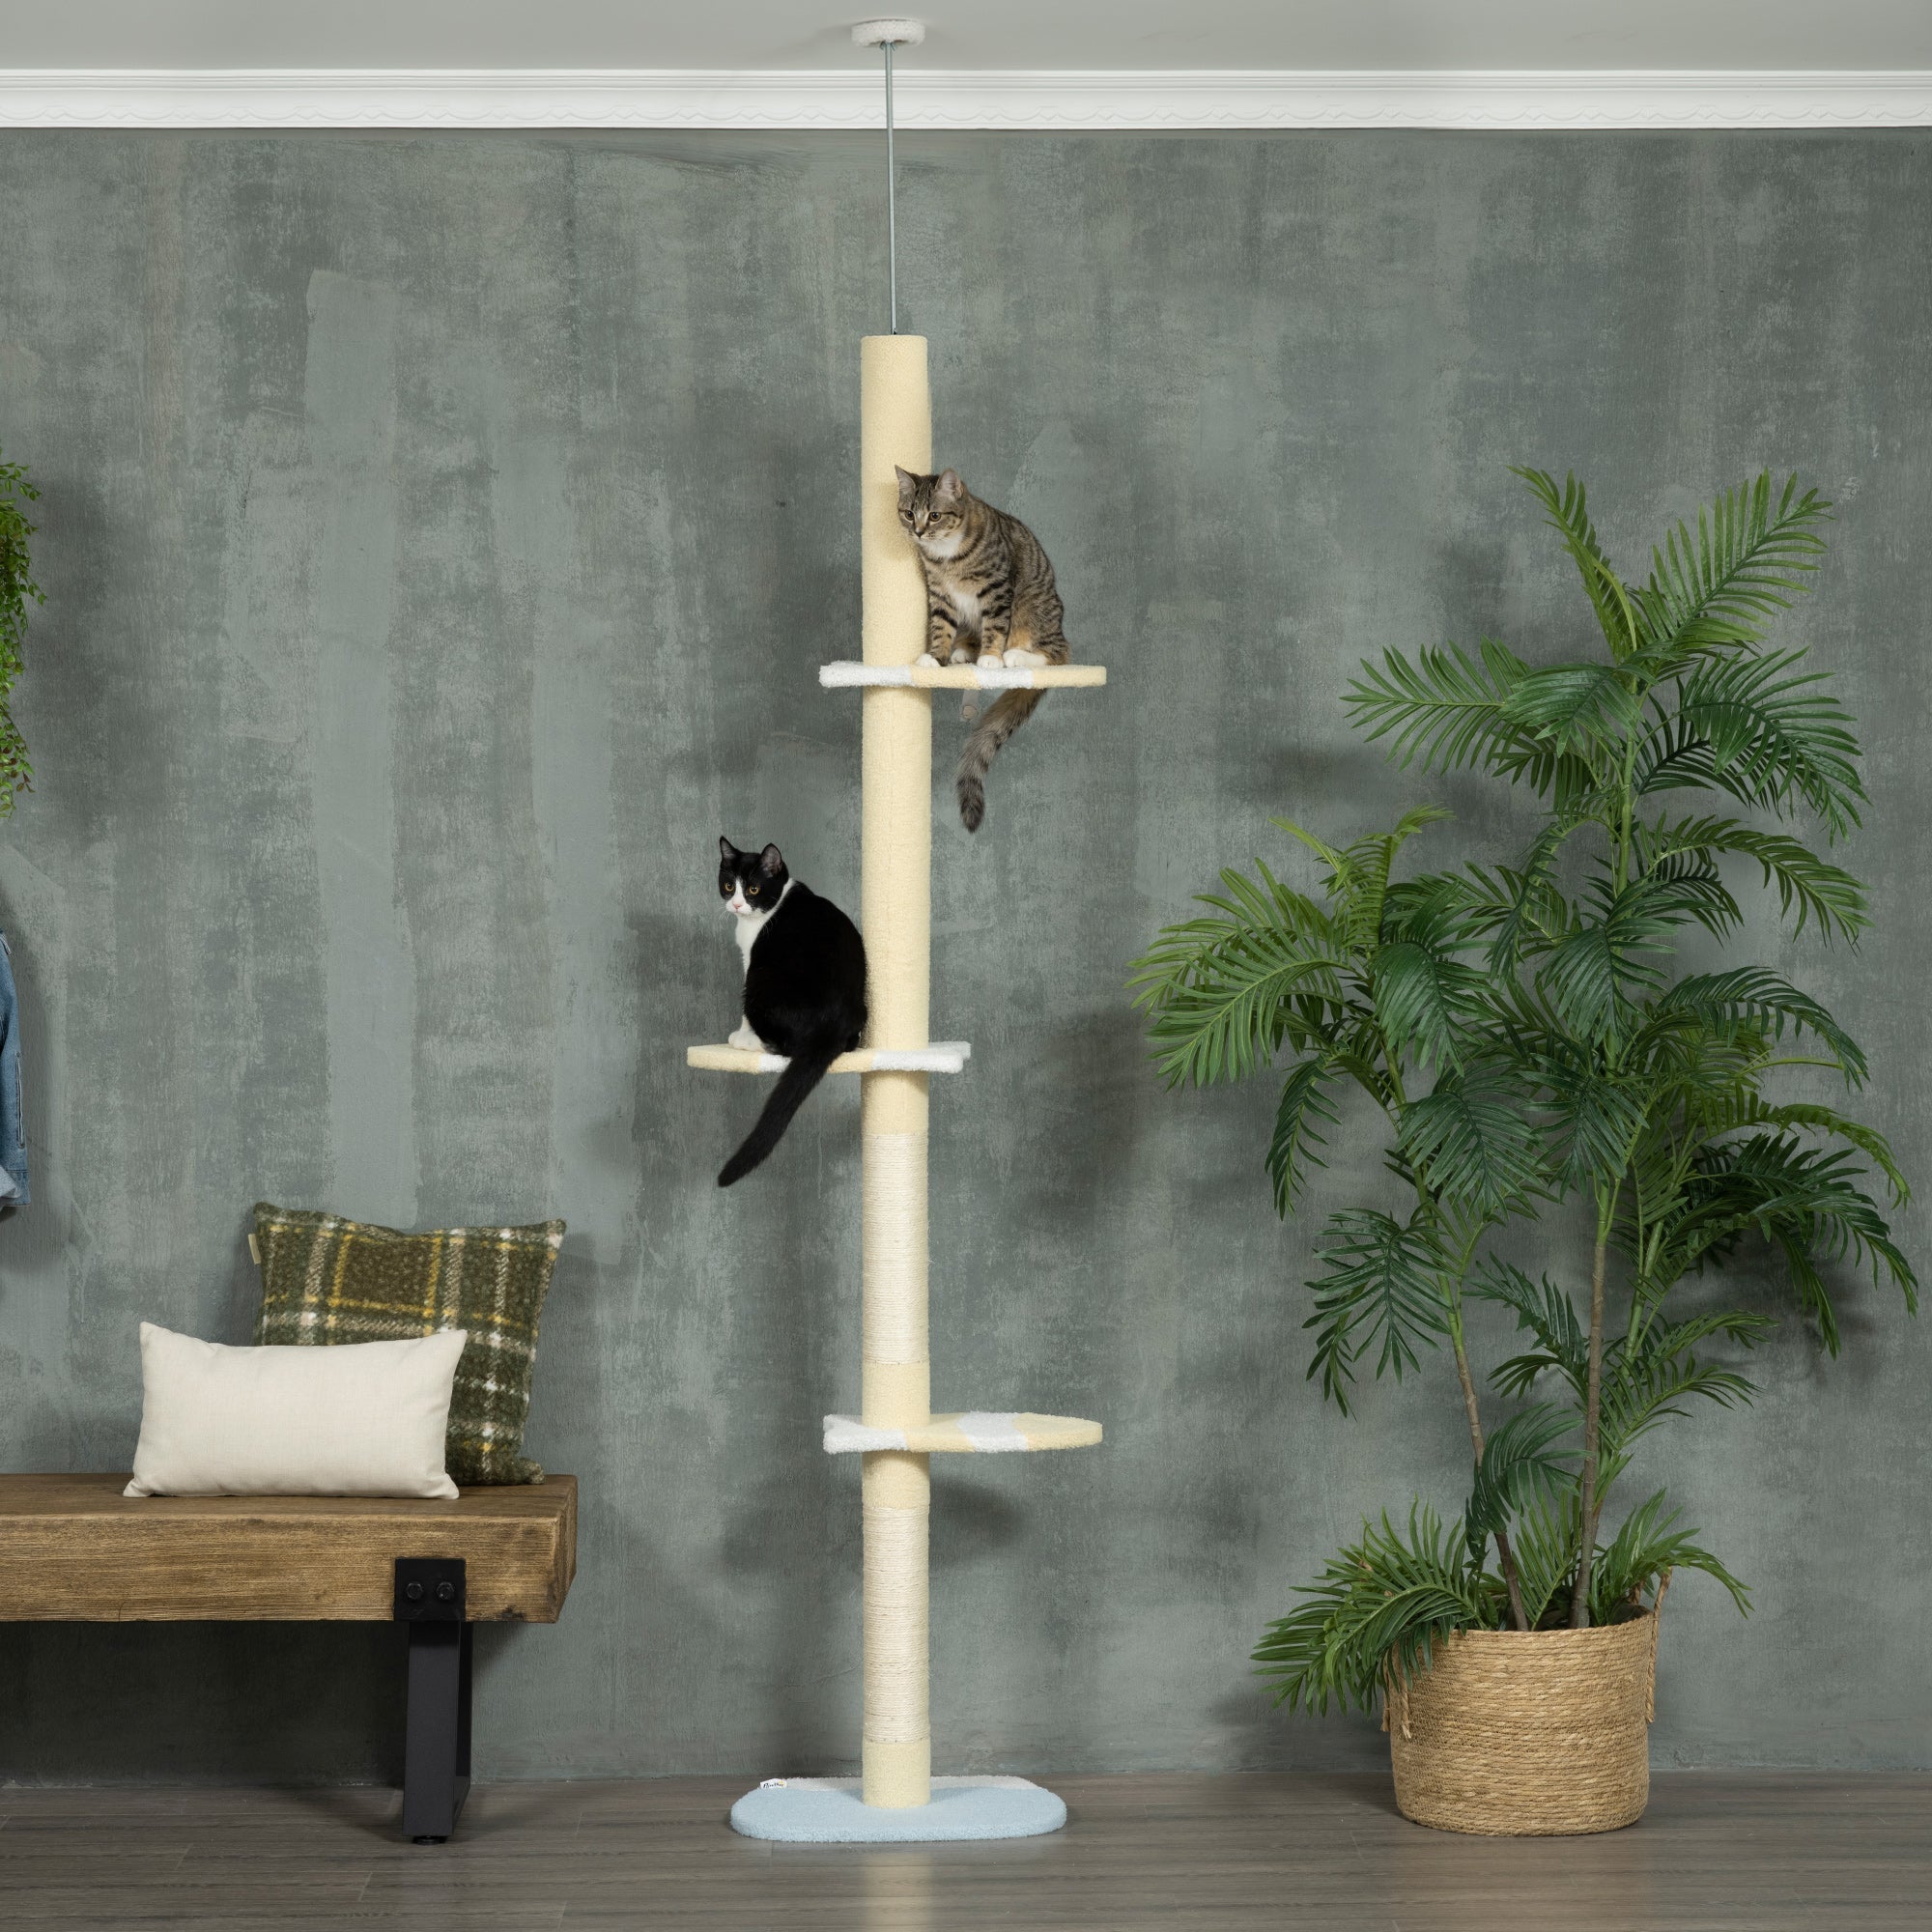 260cm Floor to Ceiling Cat Tree, Height Adjustable Kitten Tower with Anti-slip Kit, Multi-Layer Activity Center with Fish-shaped Perches Scratching Post Ball Toy, Yellow, PawHut,